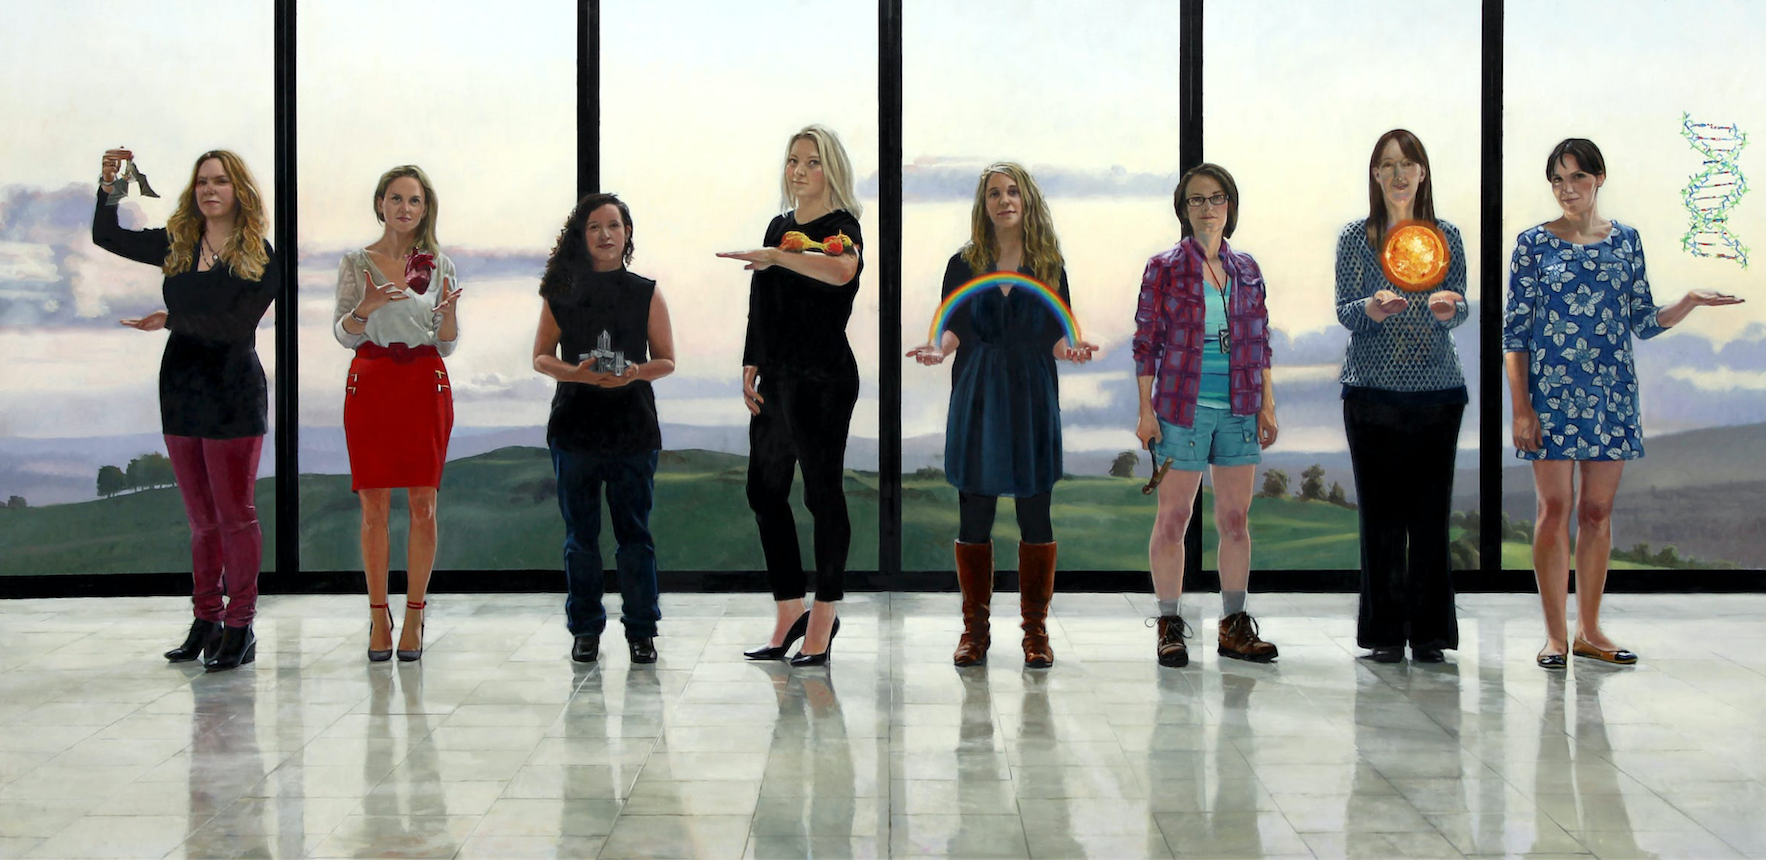 The centrepiece of Accenture's Women on Walls campaign, a large painting of eight women standing in various poses looking directly at the camera. Each holds an item related to their area of expertise.